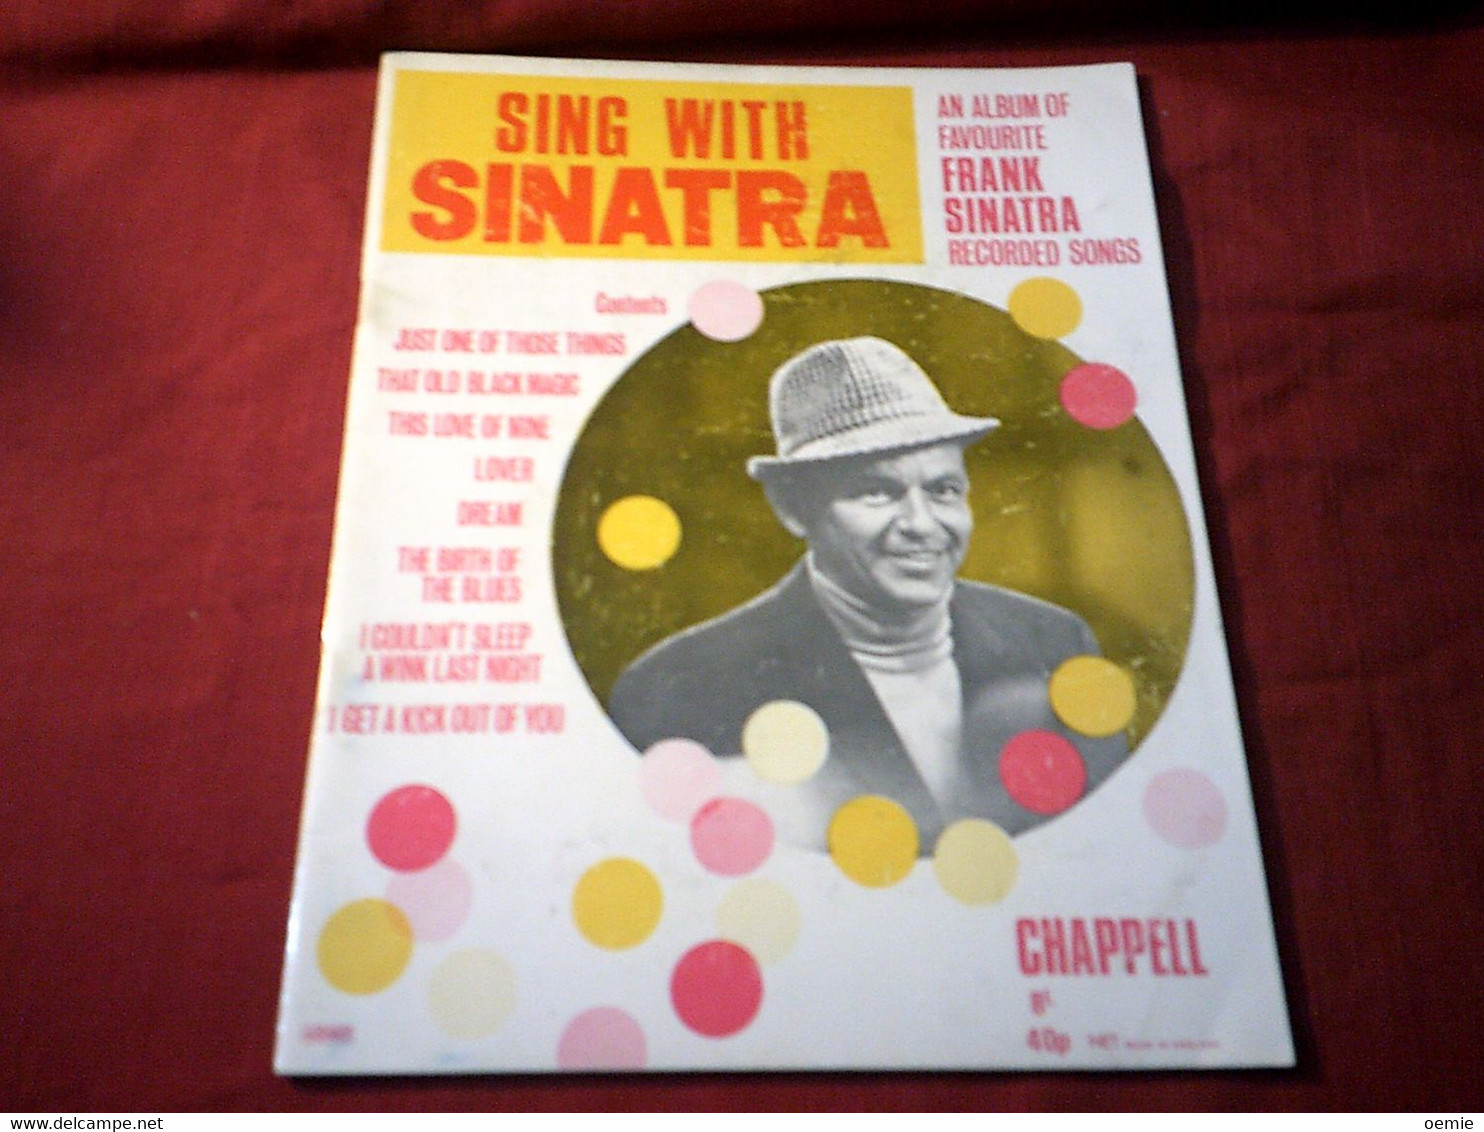 SING WHIT SINATRA     / AND ALBUM OF FAVORITE FRANK SINATRA RECORDED SONGS // CHAPPELL MADE IN ANGLAND - Culture